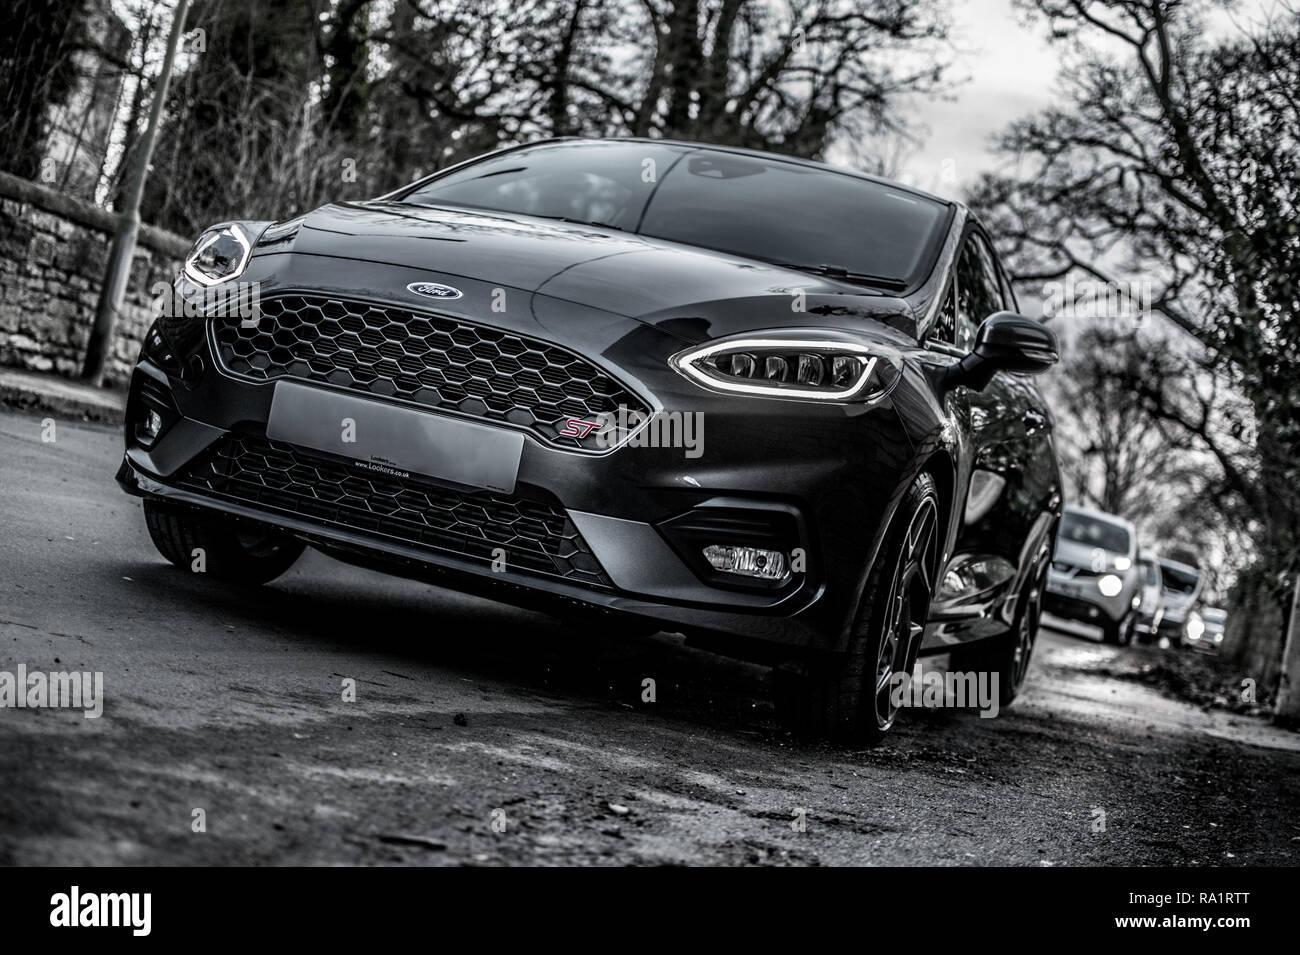 2018 Ford Fiesta ST 3 Performance Pack Stock Photo   Alamy